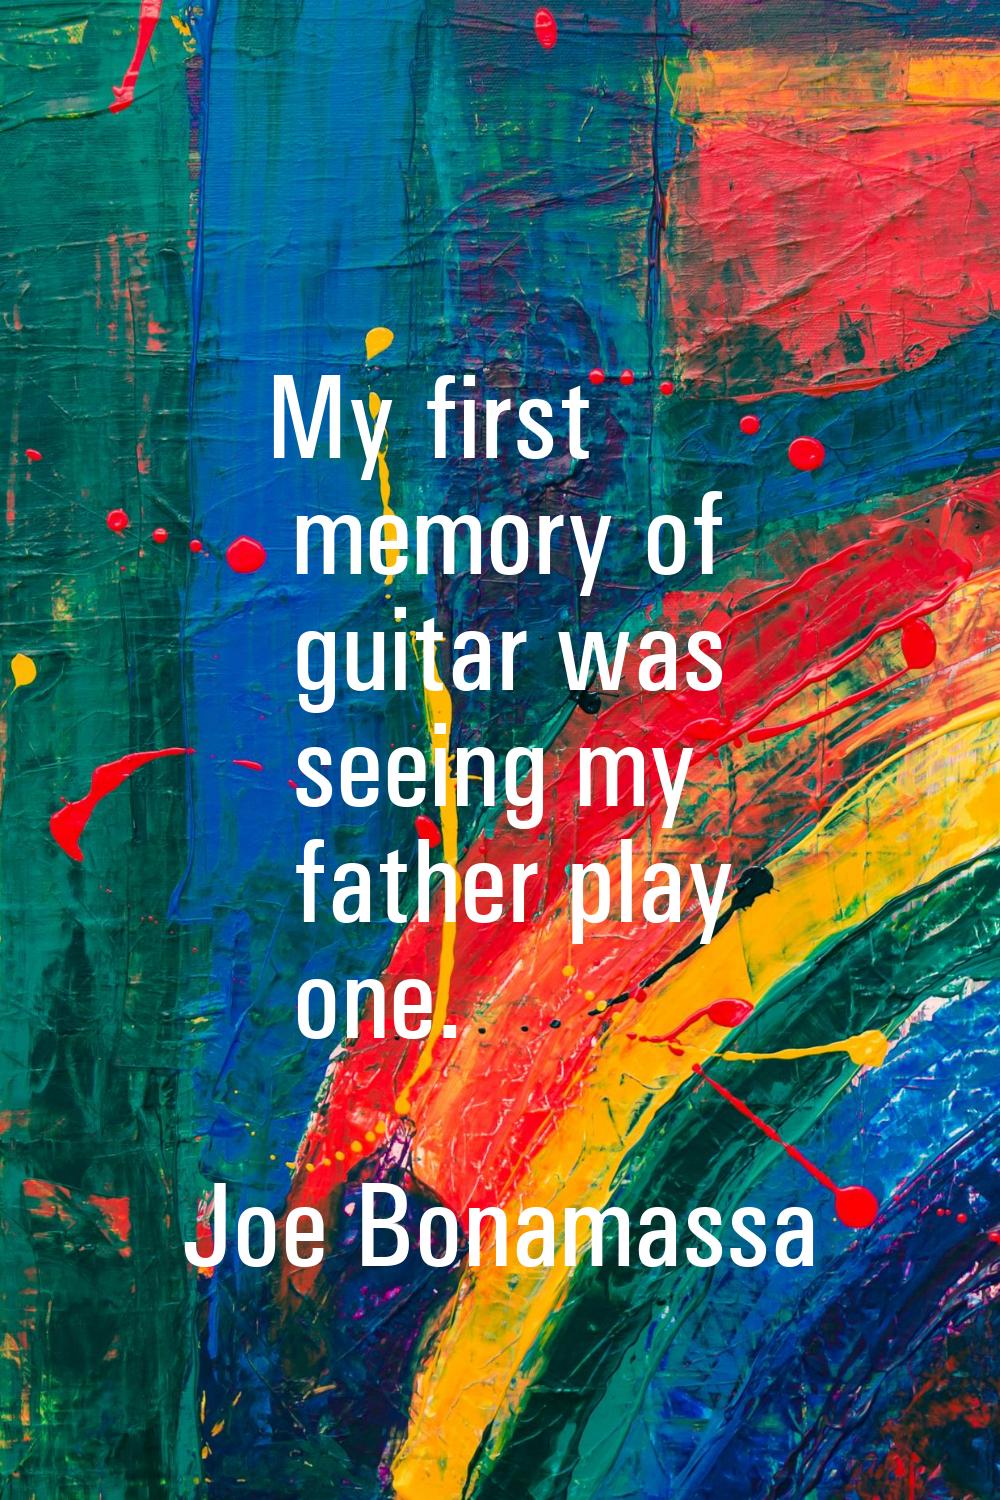 My first memory of guitar was seeing my father play one.